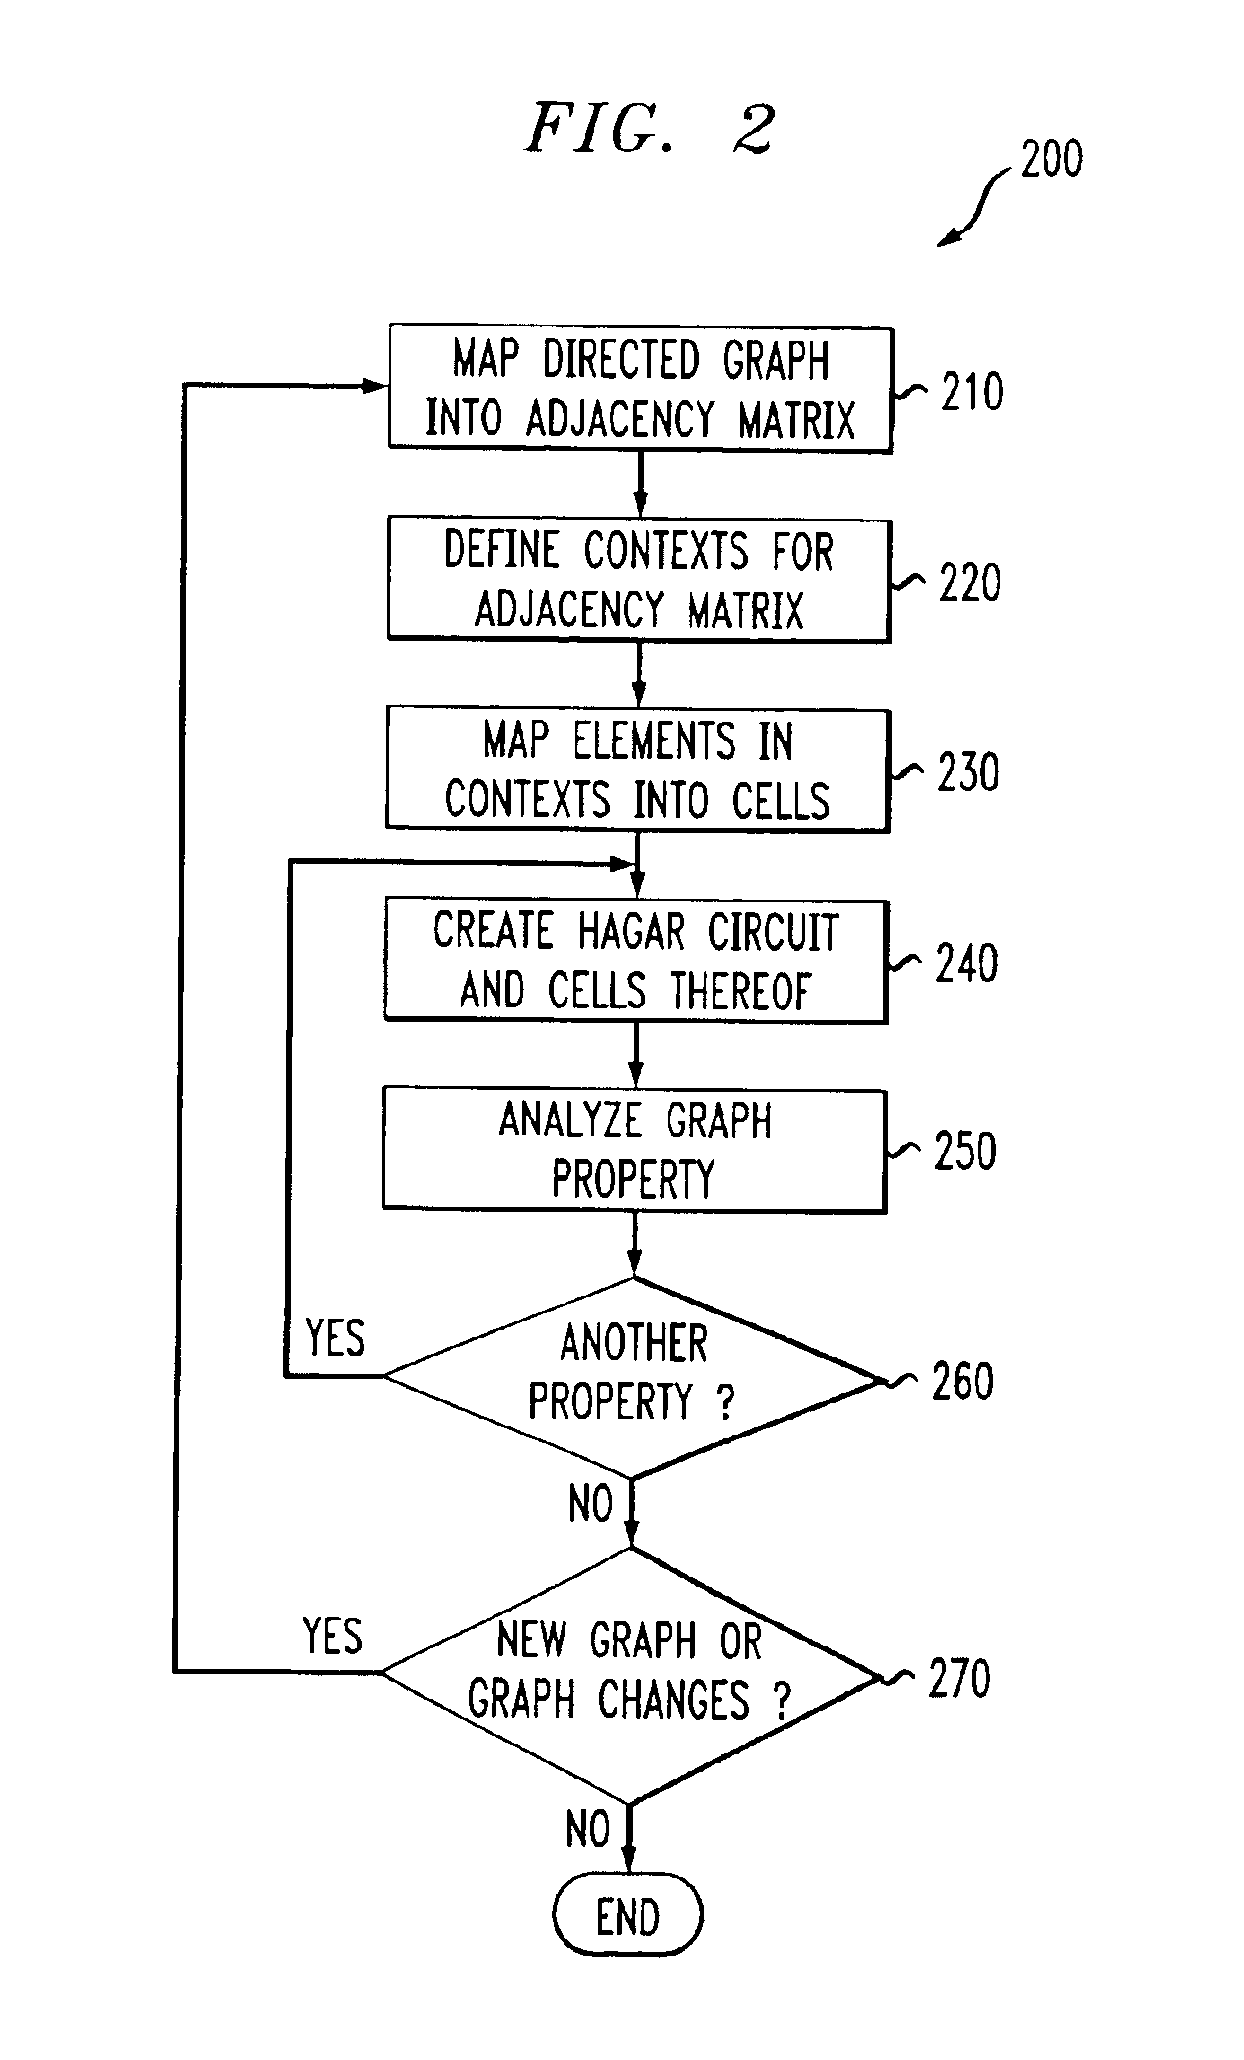 Apparatus and methods for analyzing graphs